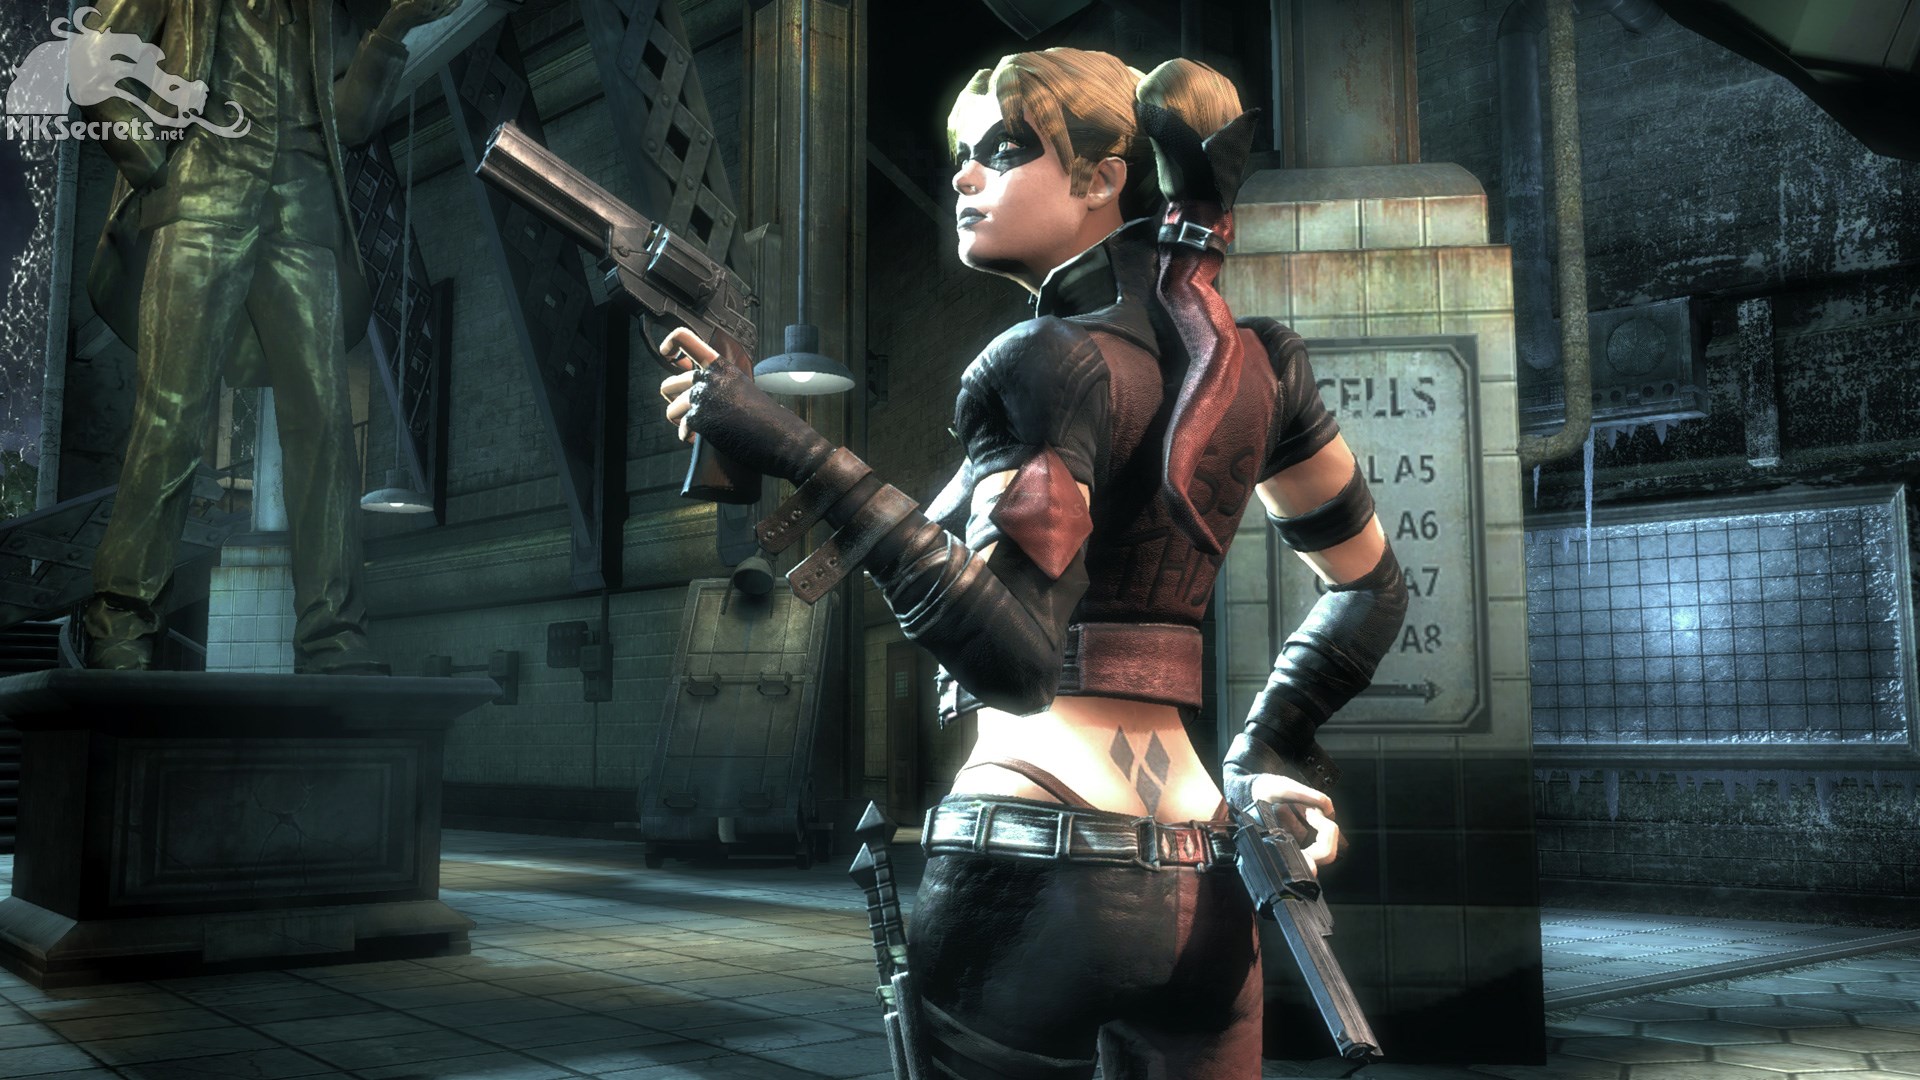 Injustice Ps3 Harley Quinn , HD Wallpaper & Backgrounds